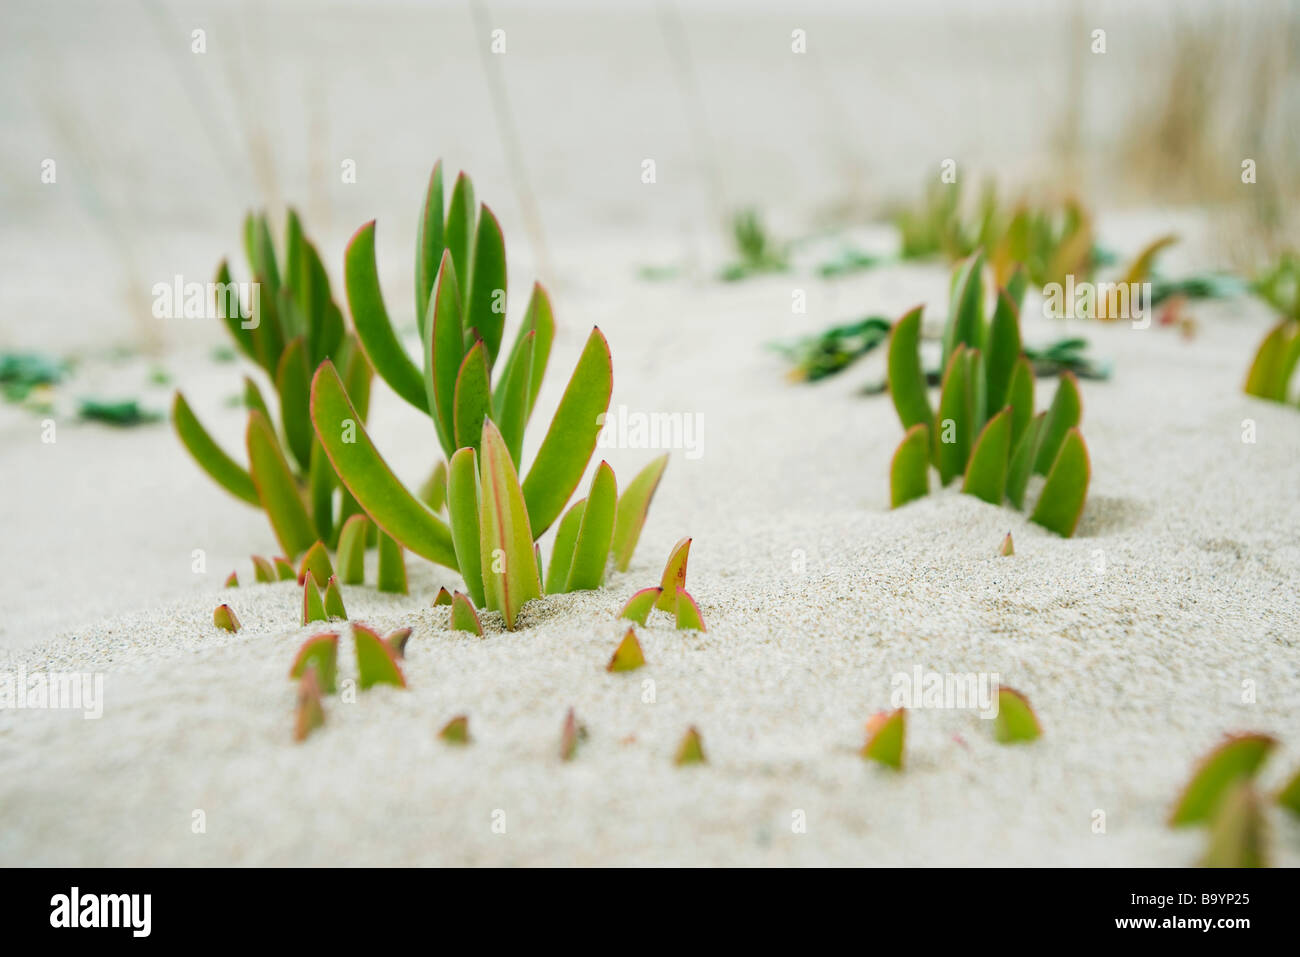 Succulent plants growing in sand Stock Photo